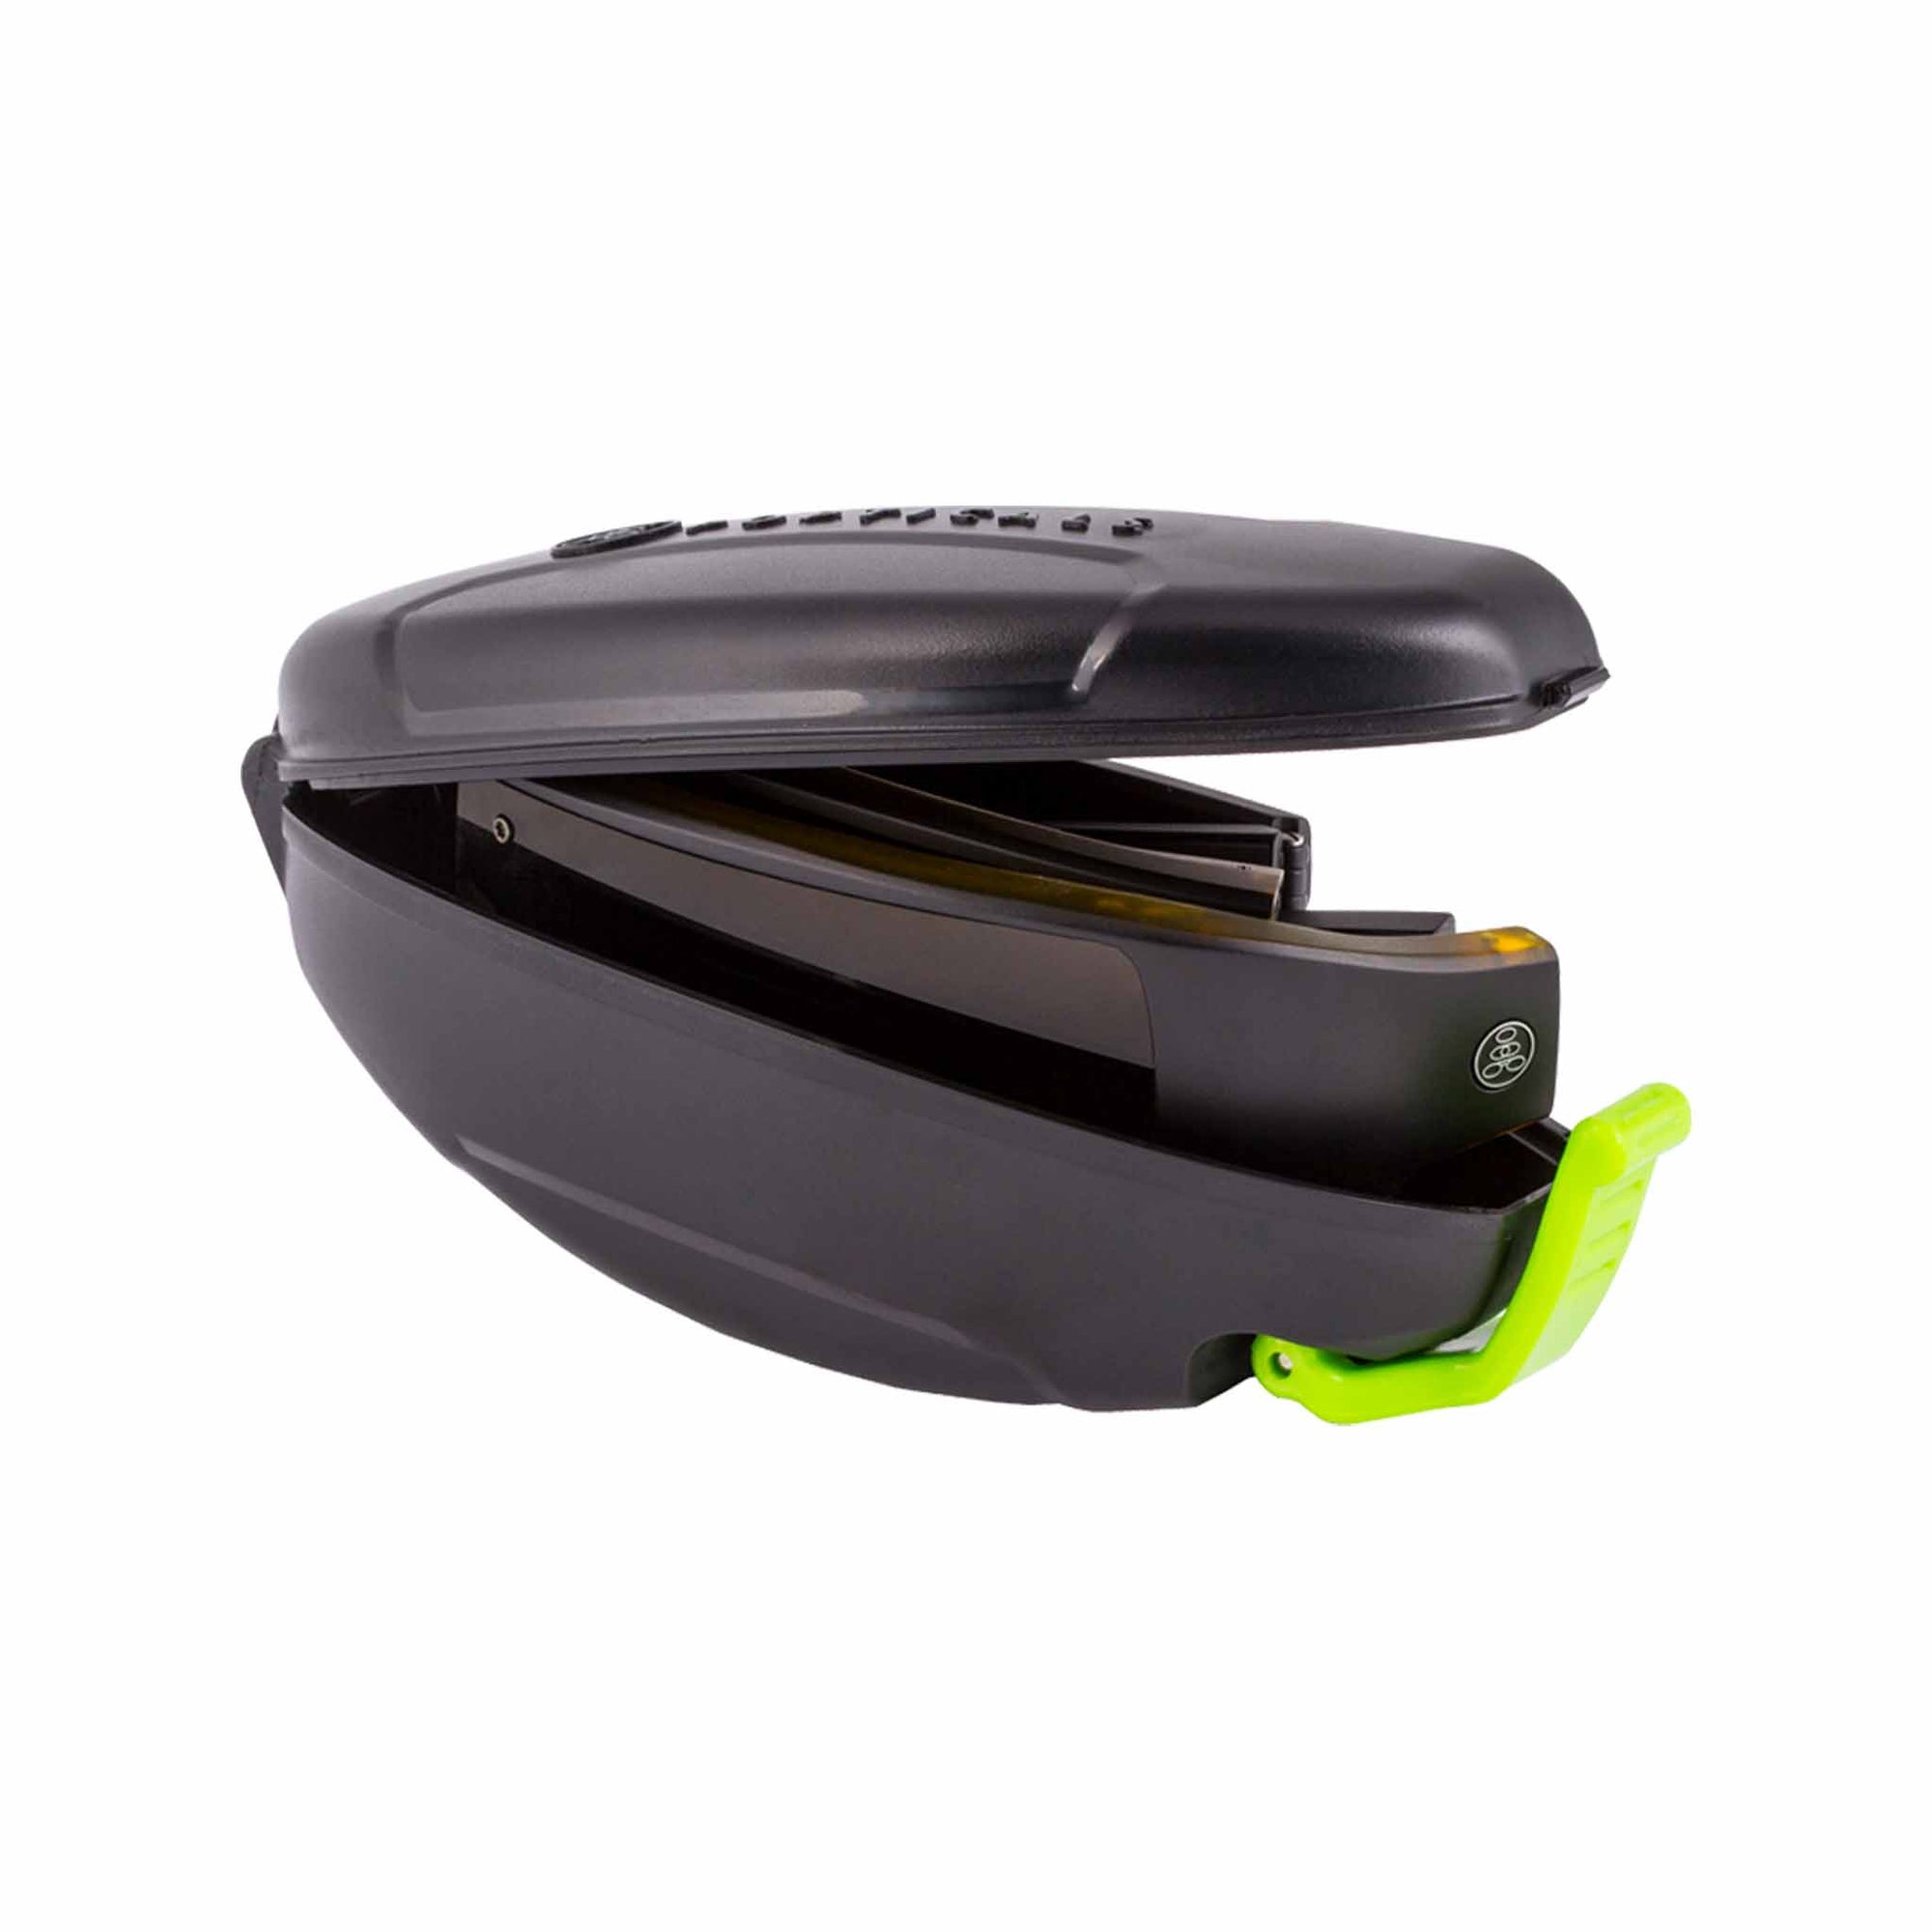 Protective case for POPGEAR sunglasses in black with a secure closure